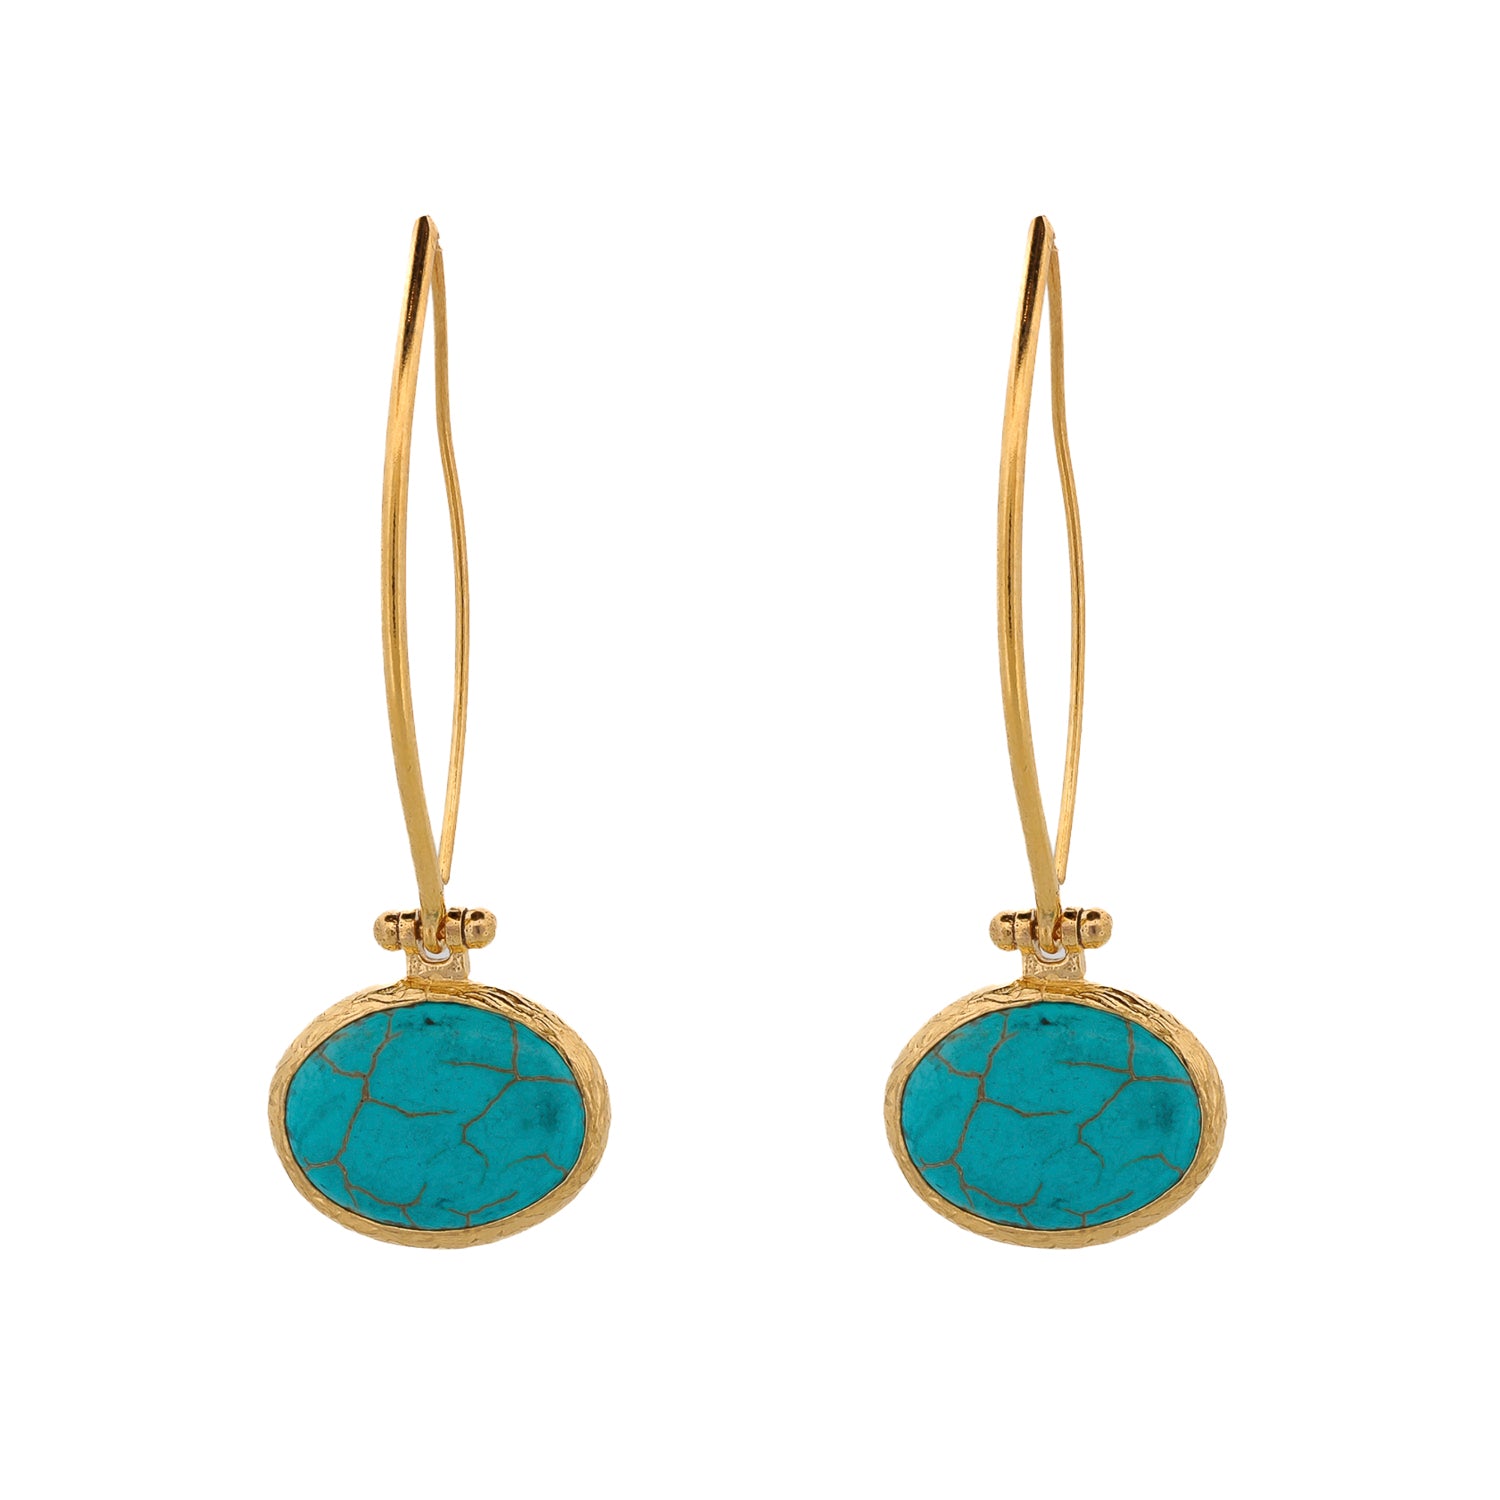 Elegant Turquoise Dangle Earrings with 18K Gold Plating